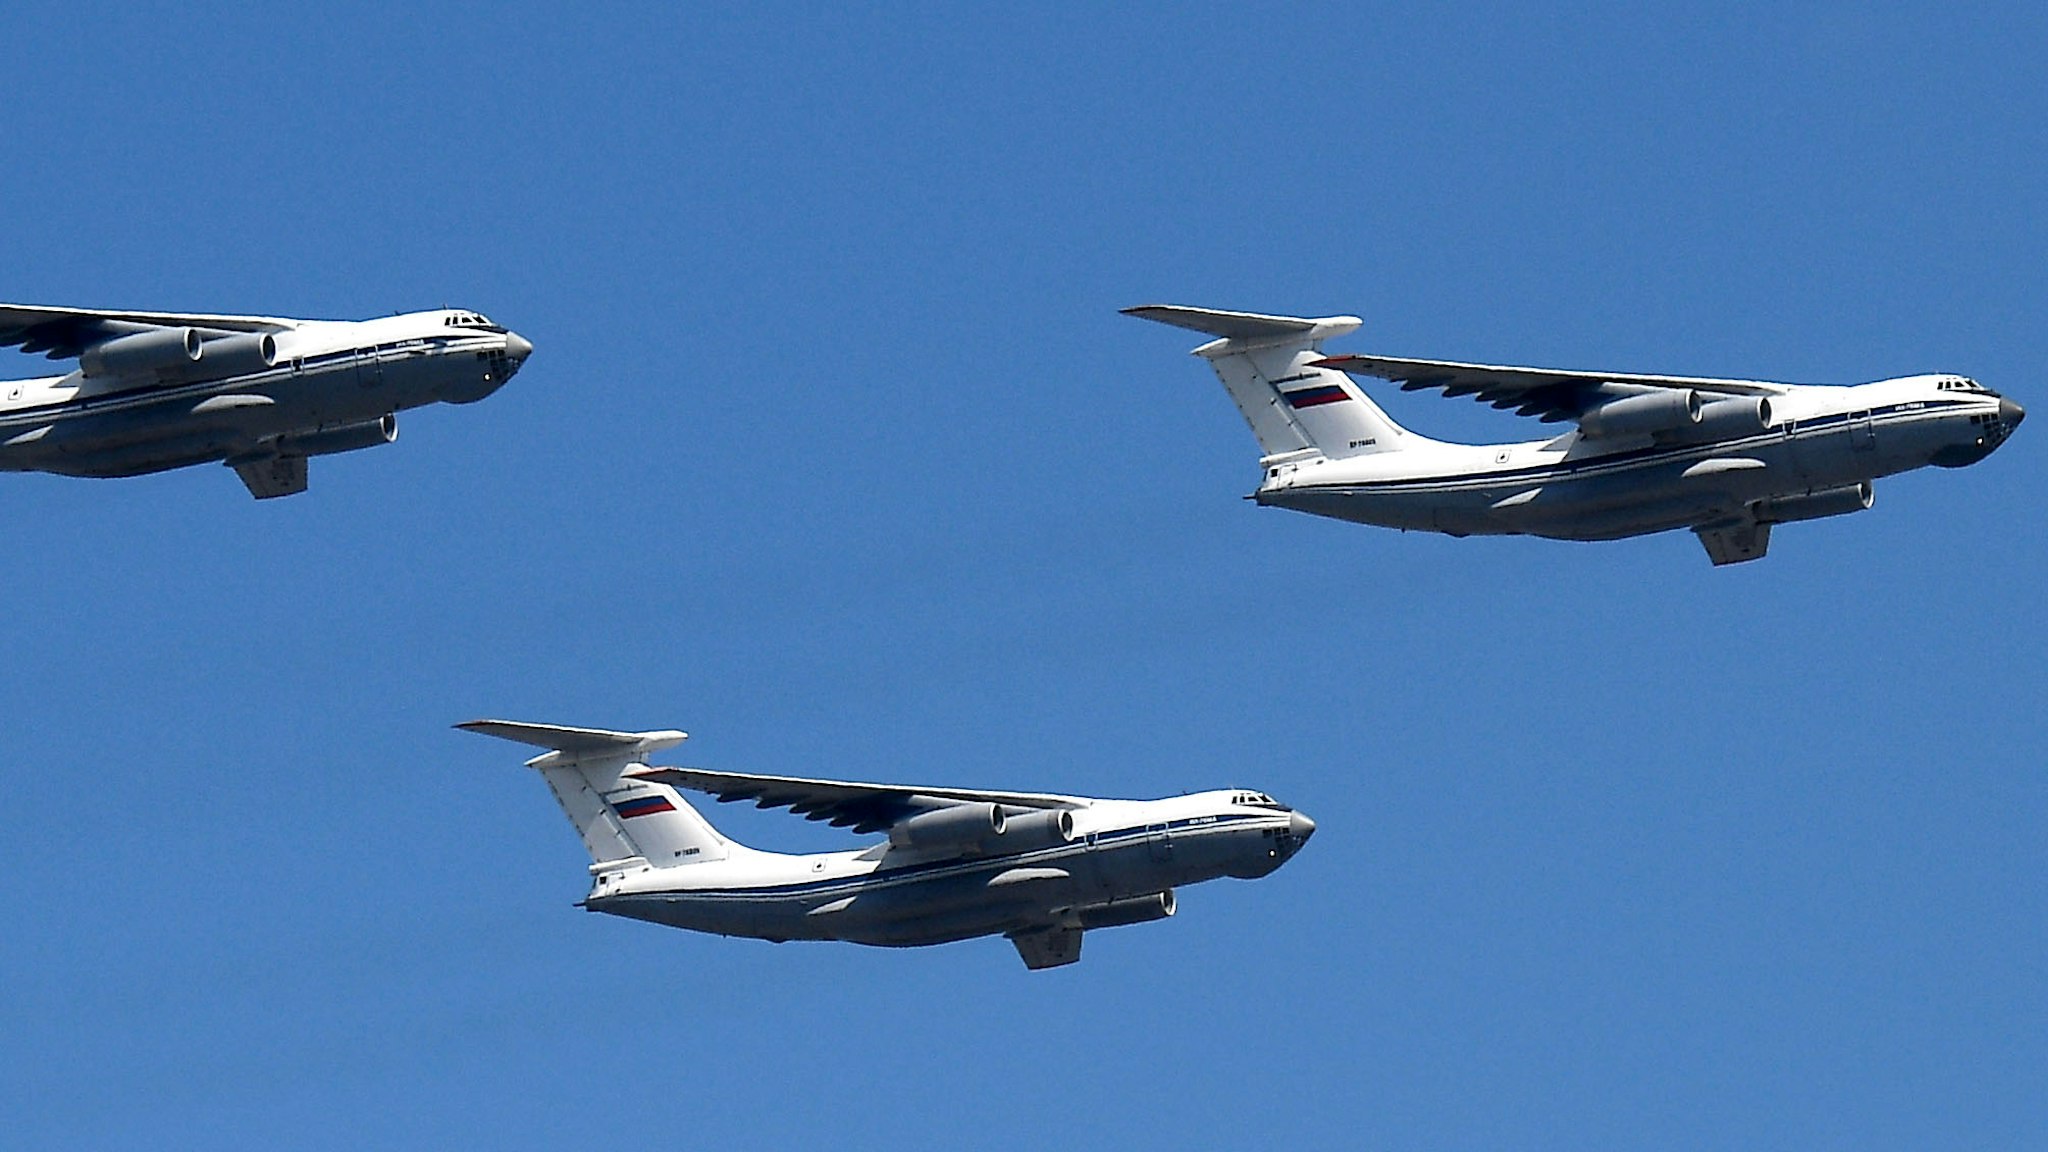 MOSCOW, RUSSIA - JUNE 24: Ilyushin Il-76 transport planes perform a flypast over Red Square during the Victory Day military parade marking the 75th anniversary of the victory in World War II, on June 24, 2020 in Moscow, Russia. The 75th-anniversary marks the end of the Great Patriotic War when the Nazi's capitulated to the then Soviet Union.